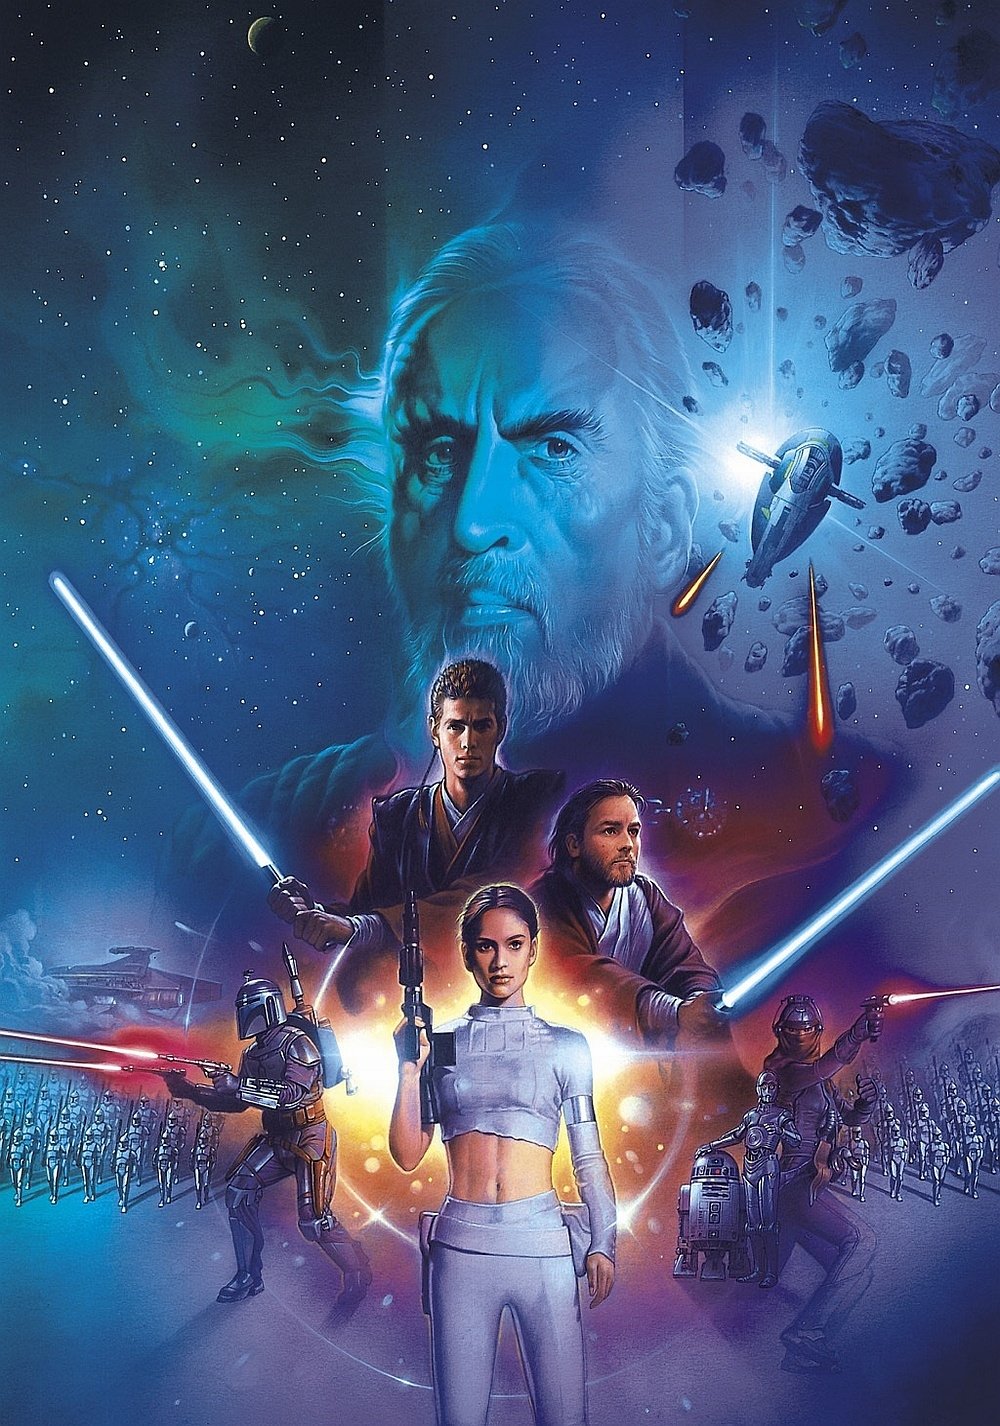 star wars attack of the clones full movie download